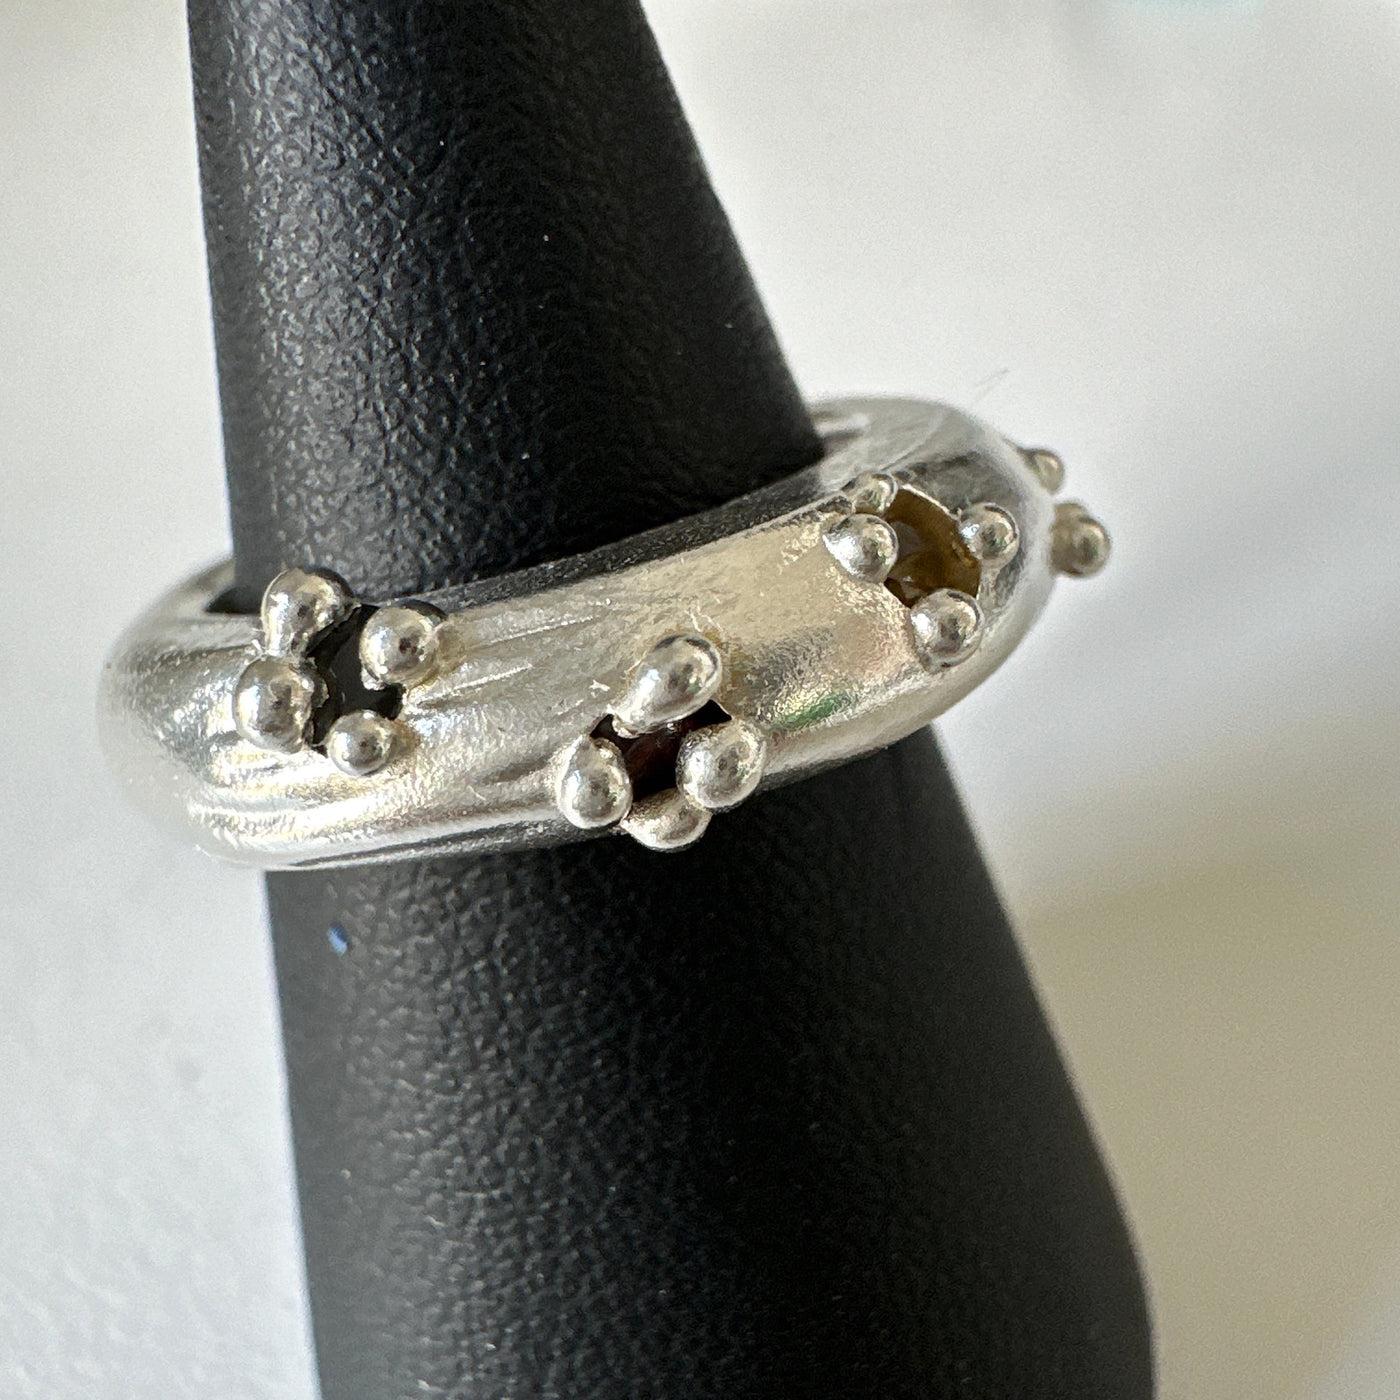 Flowers ring- sterling silver casted with 4 cubic zirconia